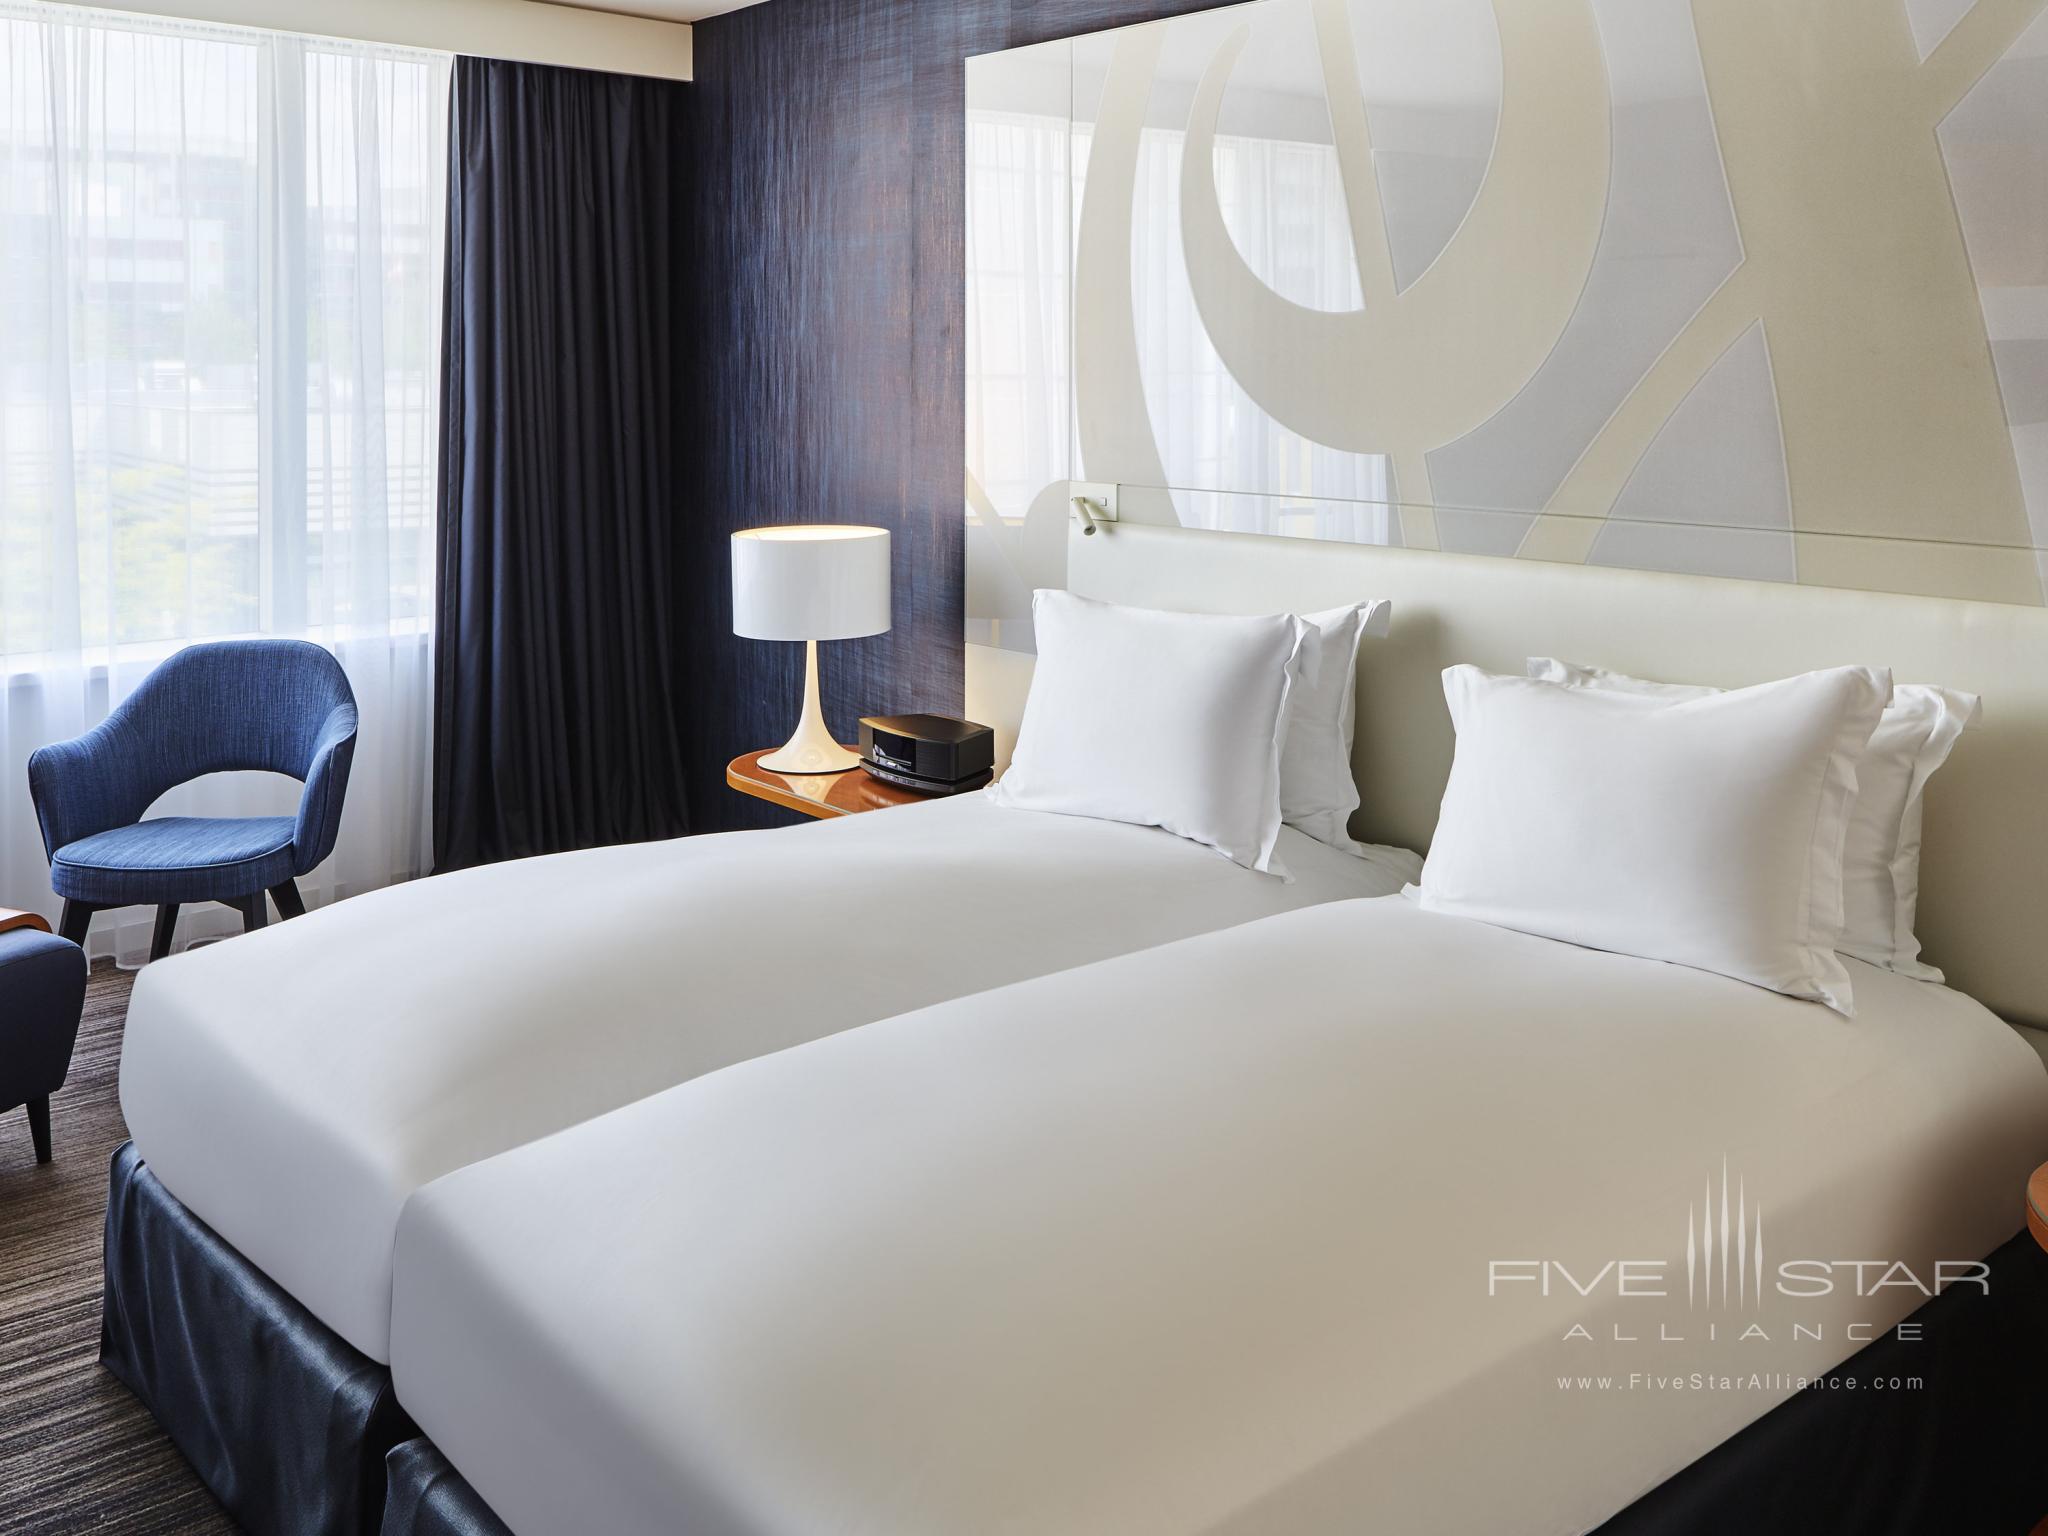 Sofitel Luxembourg Europe - 2 Twin Bed Rooms